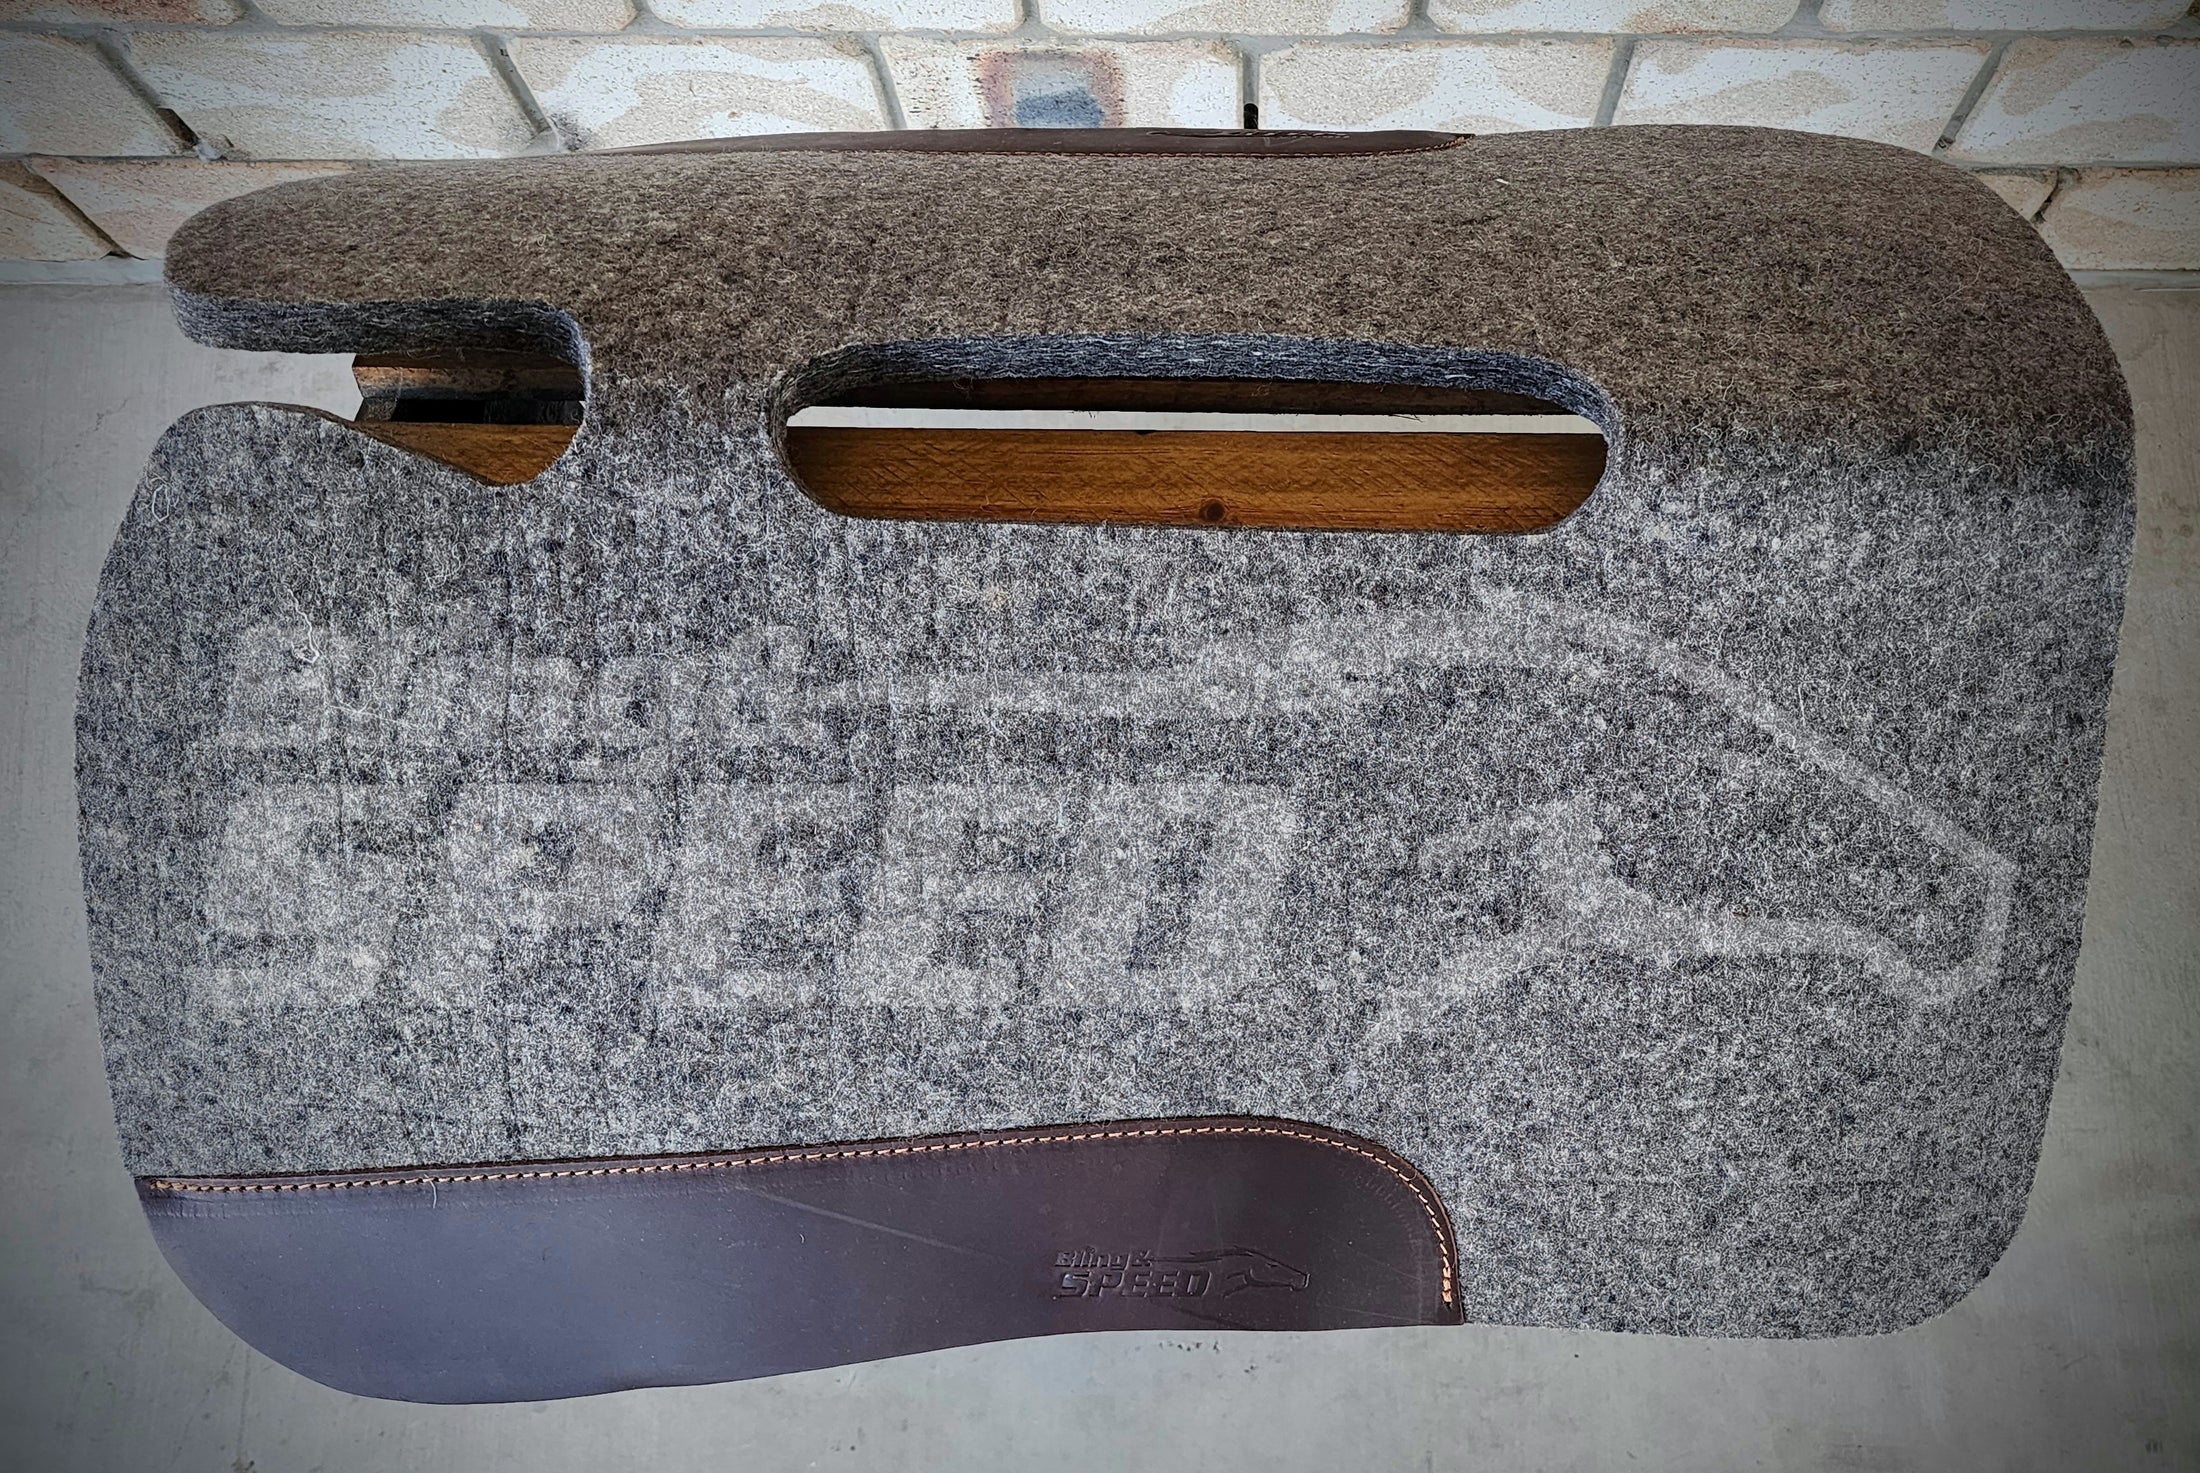 Wither and Spine Relief Felt Saddle Pad - Charcoal (7907540566254)